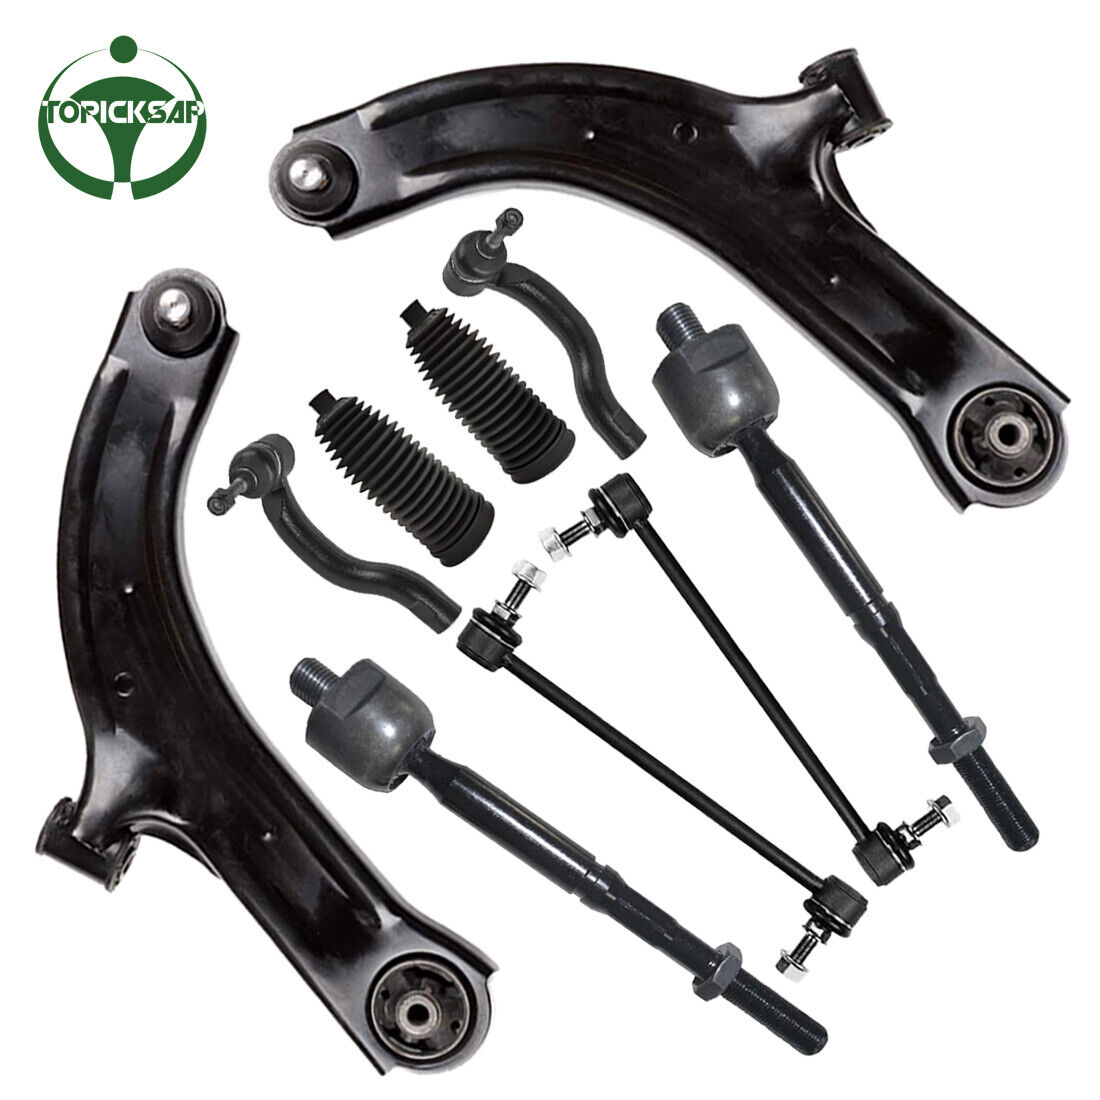 Control Arm Kit With Sway Bar for 2007-2014 Nissan Versa Cube - 10Pcs